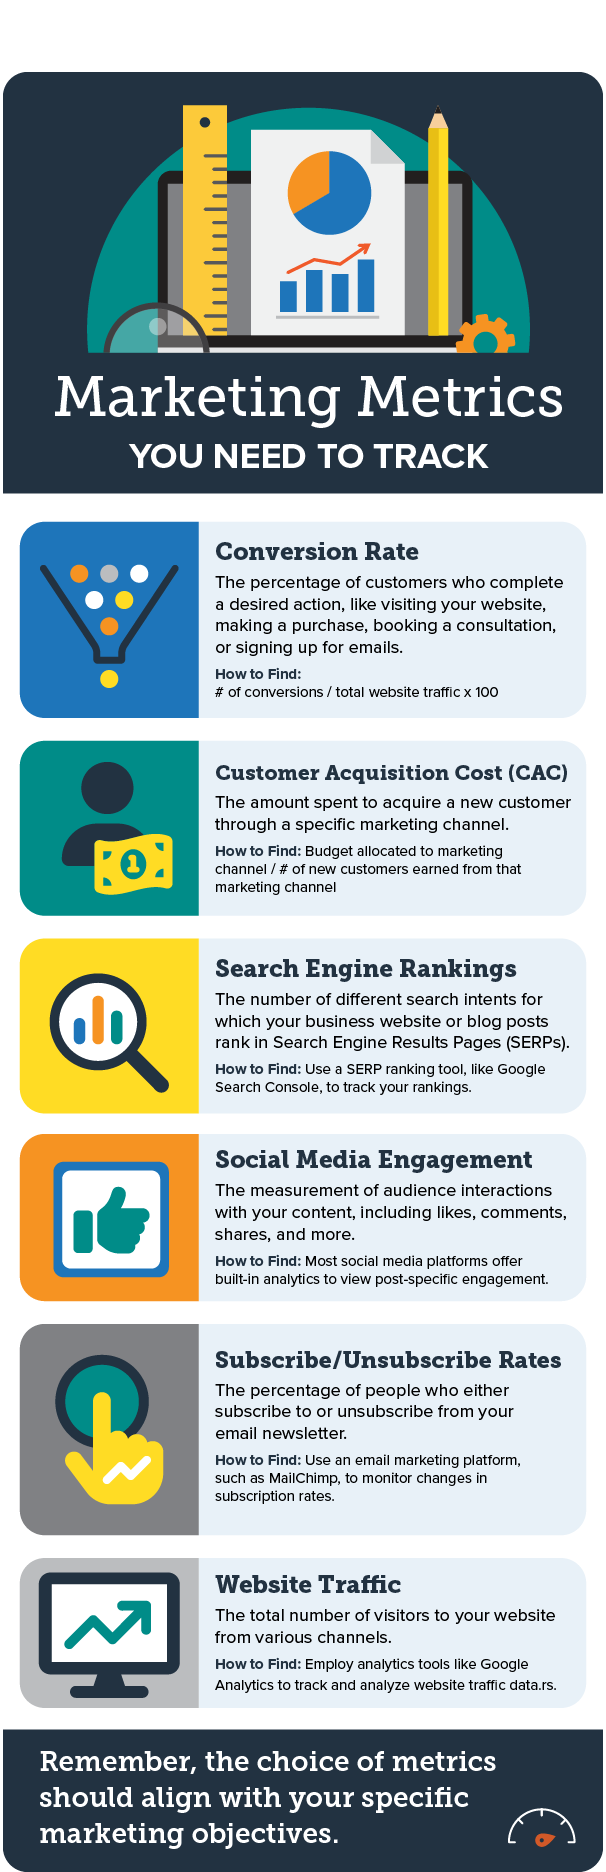 Infographic of marketing metrics to track success for small business marketing, including conversion rate, CAC, search engine rankings, social media engagement, subscribe rates, and website traffic 